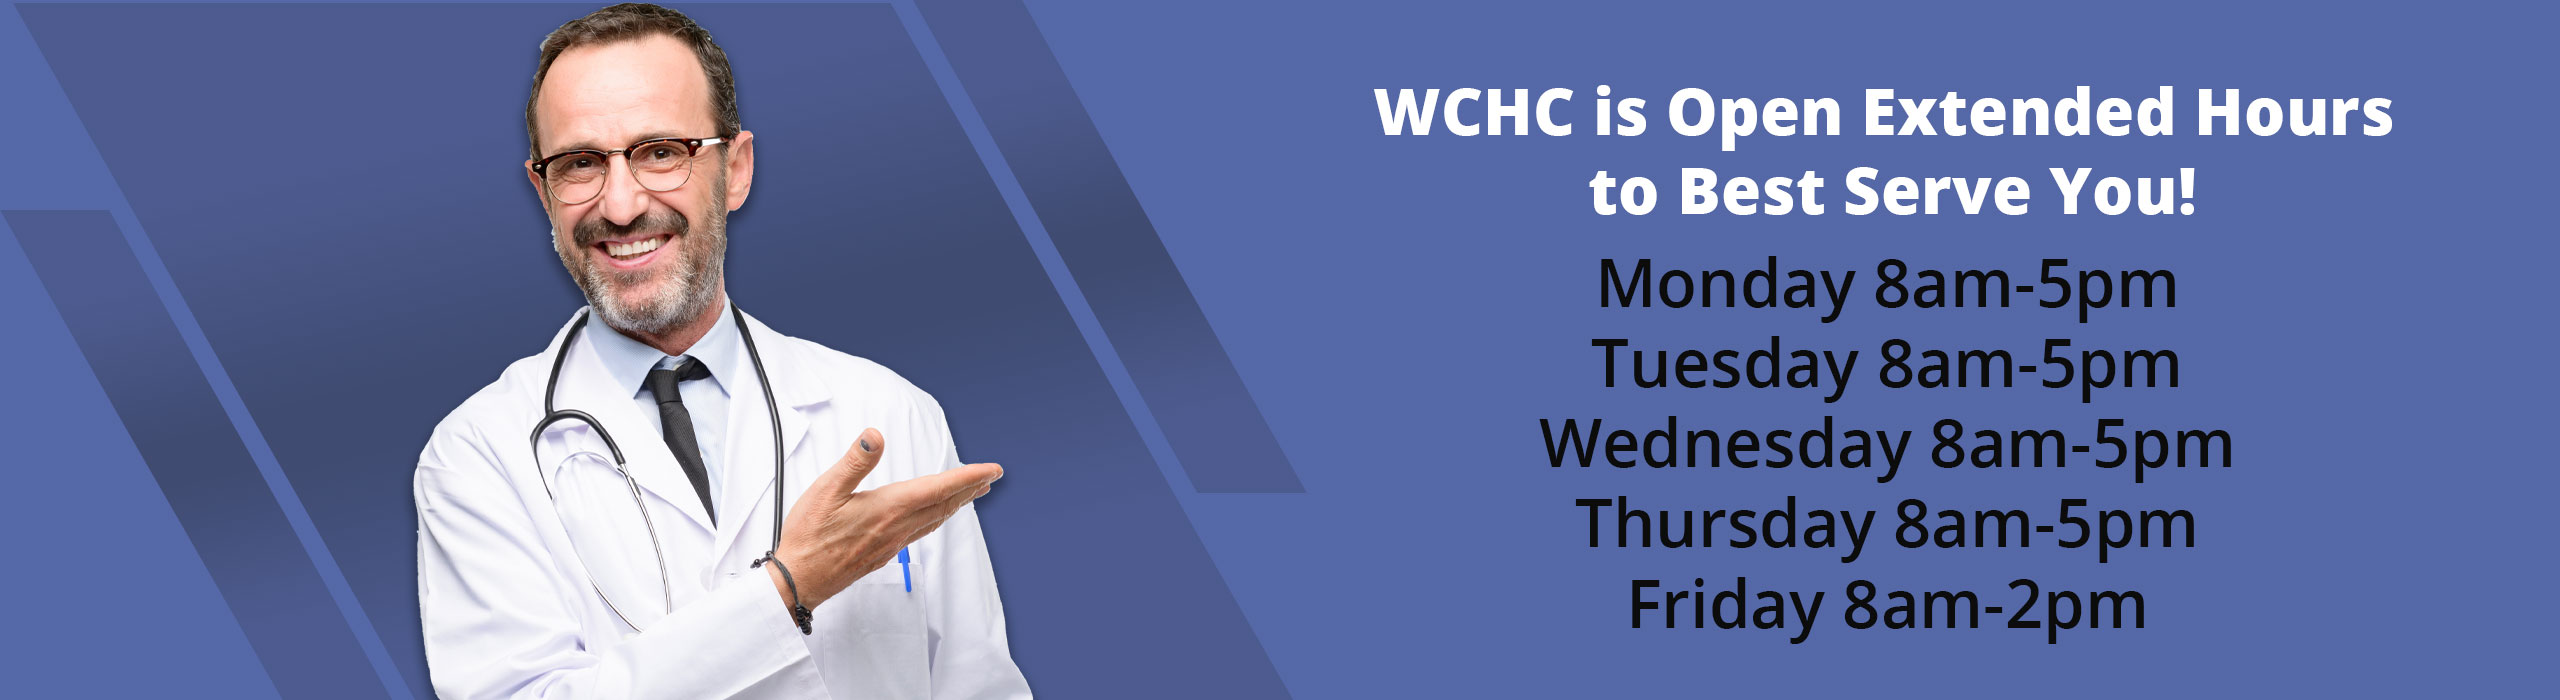 WCHC is Open Extended Hours to Best Serve You!


Monday 8am-5pm
Tuesday 8am-5pm
Wednesday 8am-5pm
Thursday 8am-5pm
Friday 8am-2pm